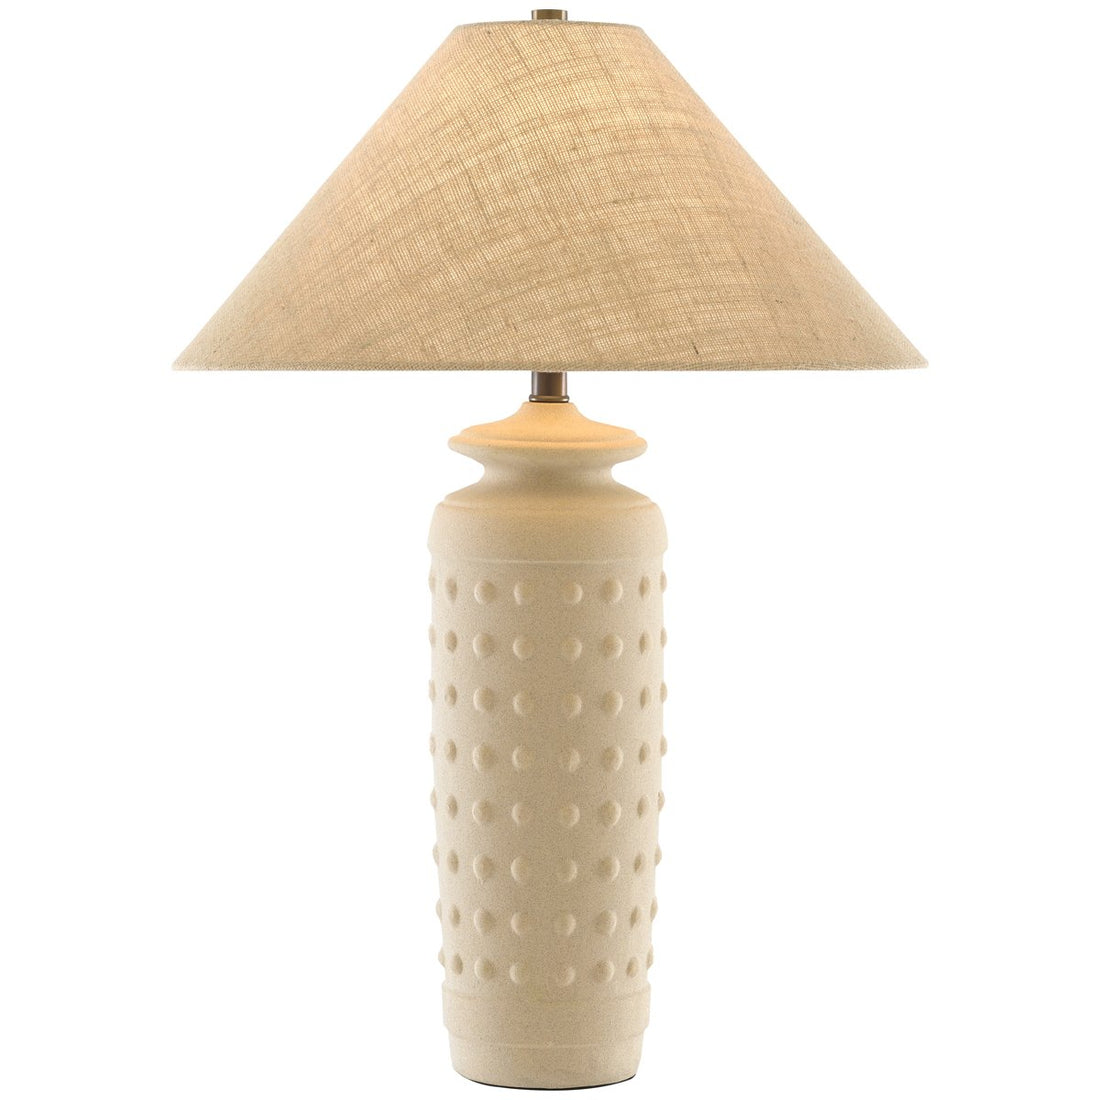 Currey and Company Sonoran Table Lamp